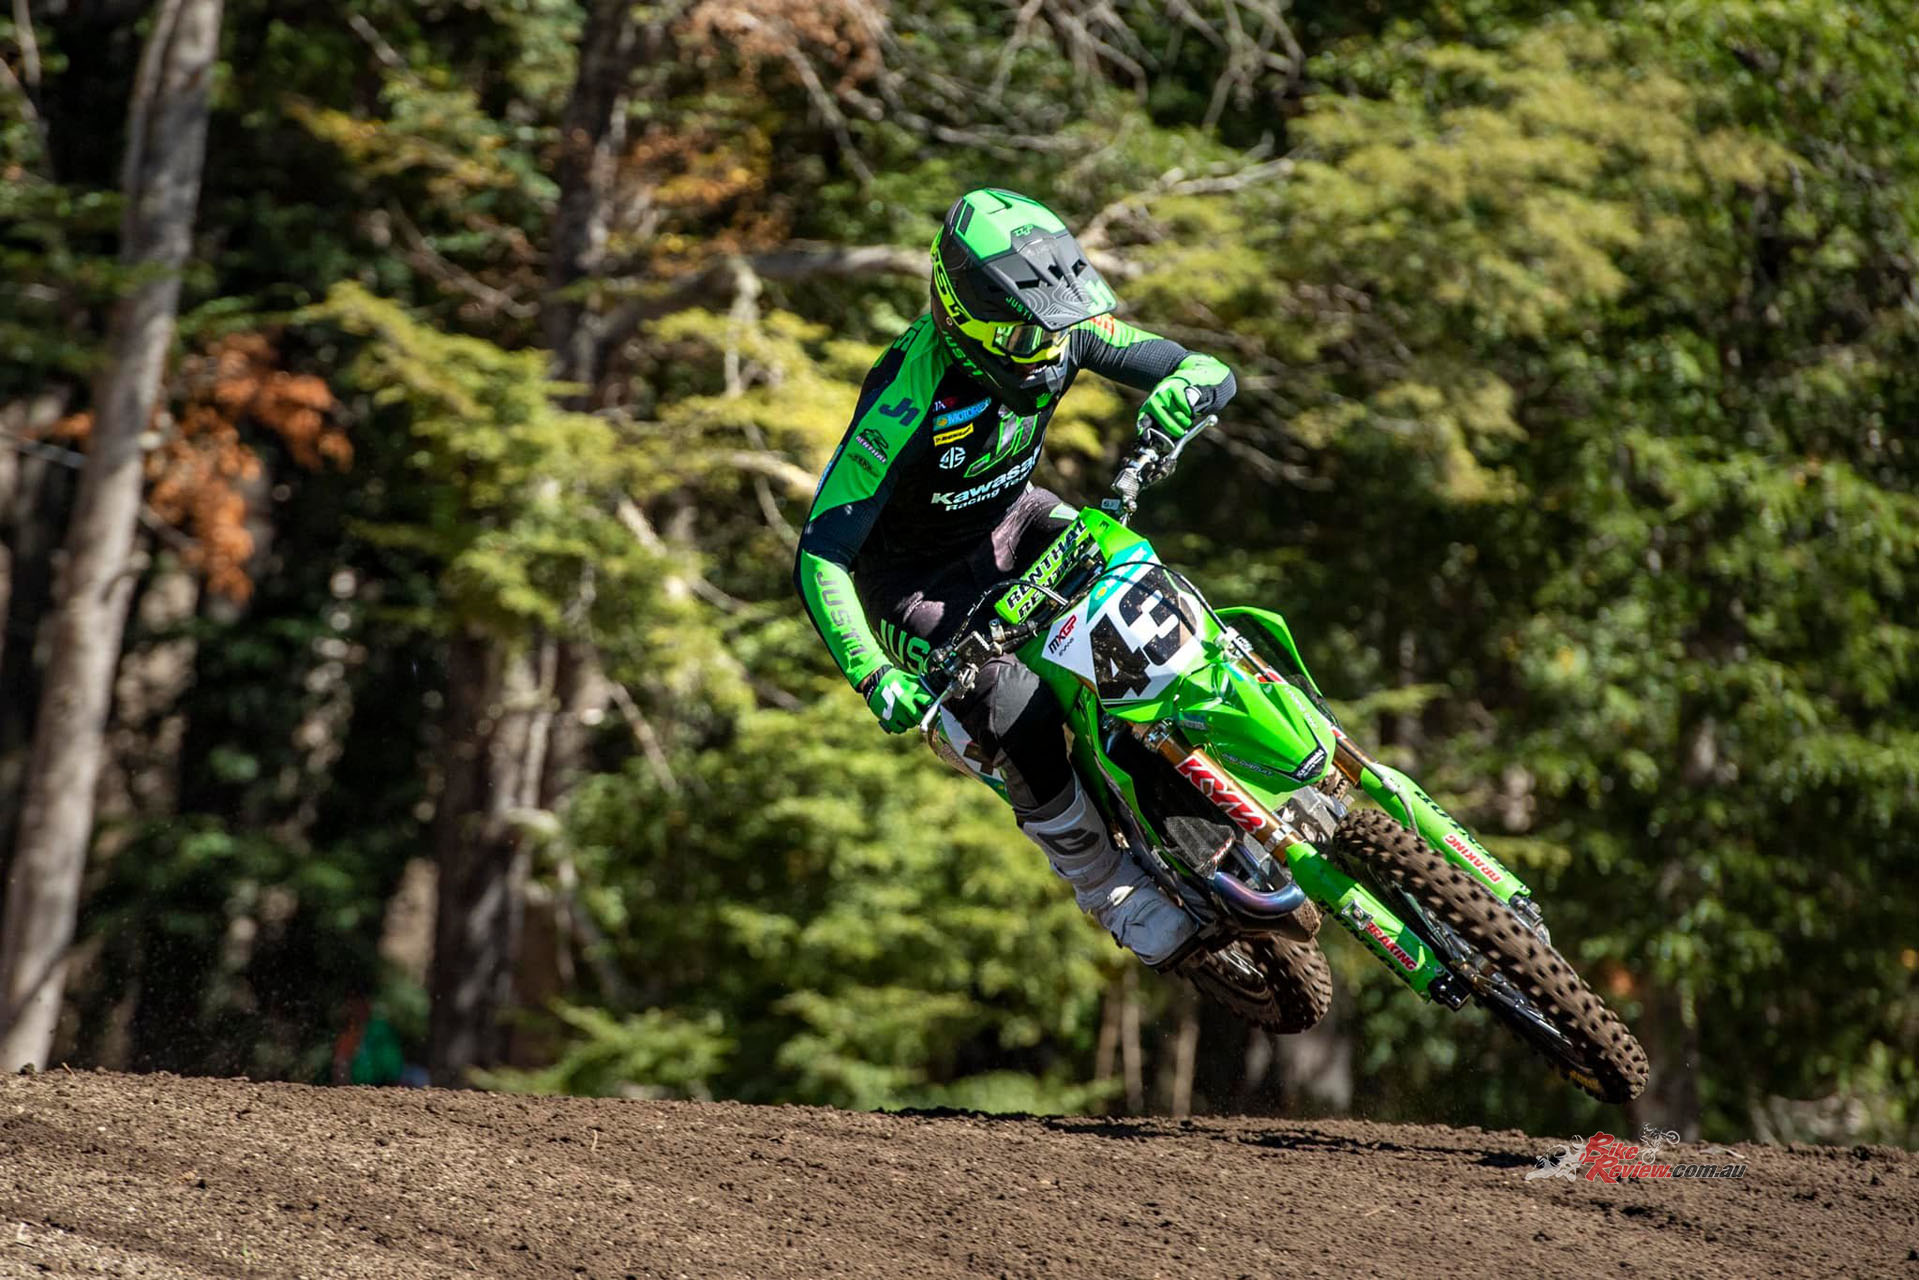 It's been great to see Mitch Evans back behind the gate for the last three rounds of MXGP aboard his factory Kawasaki. Photo: Kawasaki Racing EU.